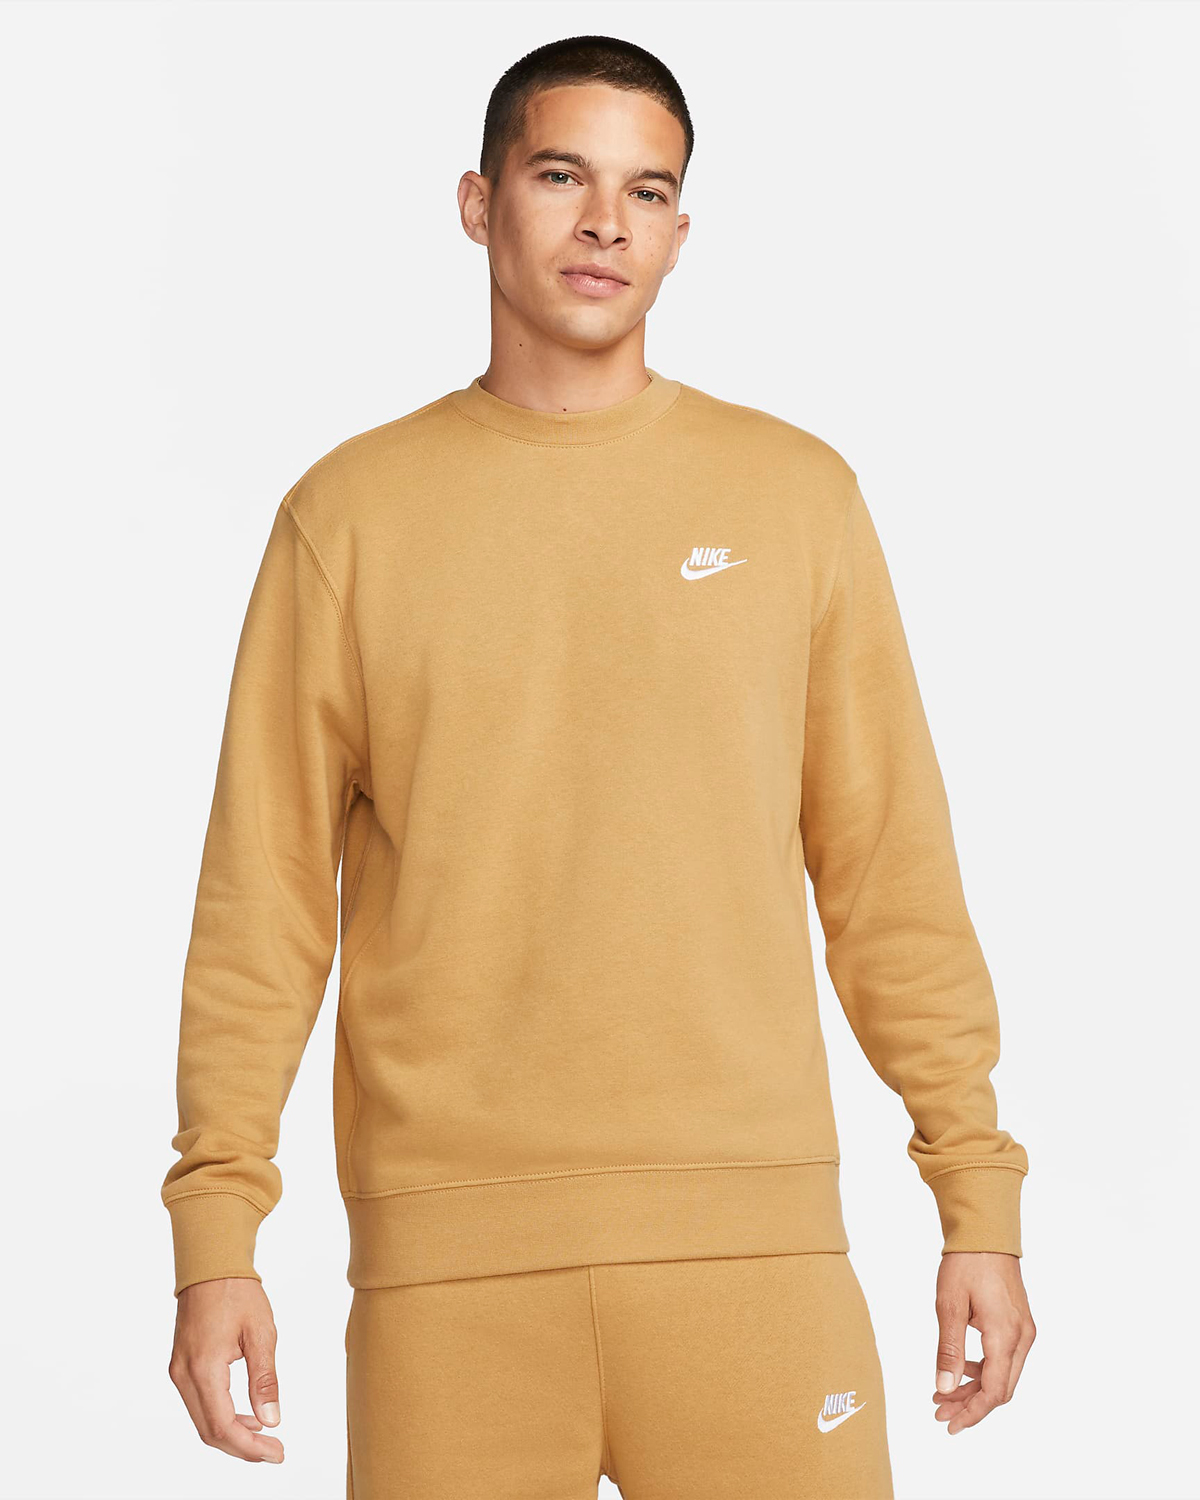 Nike Elemental Gold Shirts Clothing Sneaker Outfits